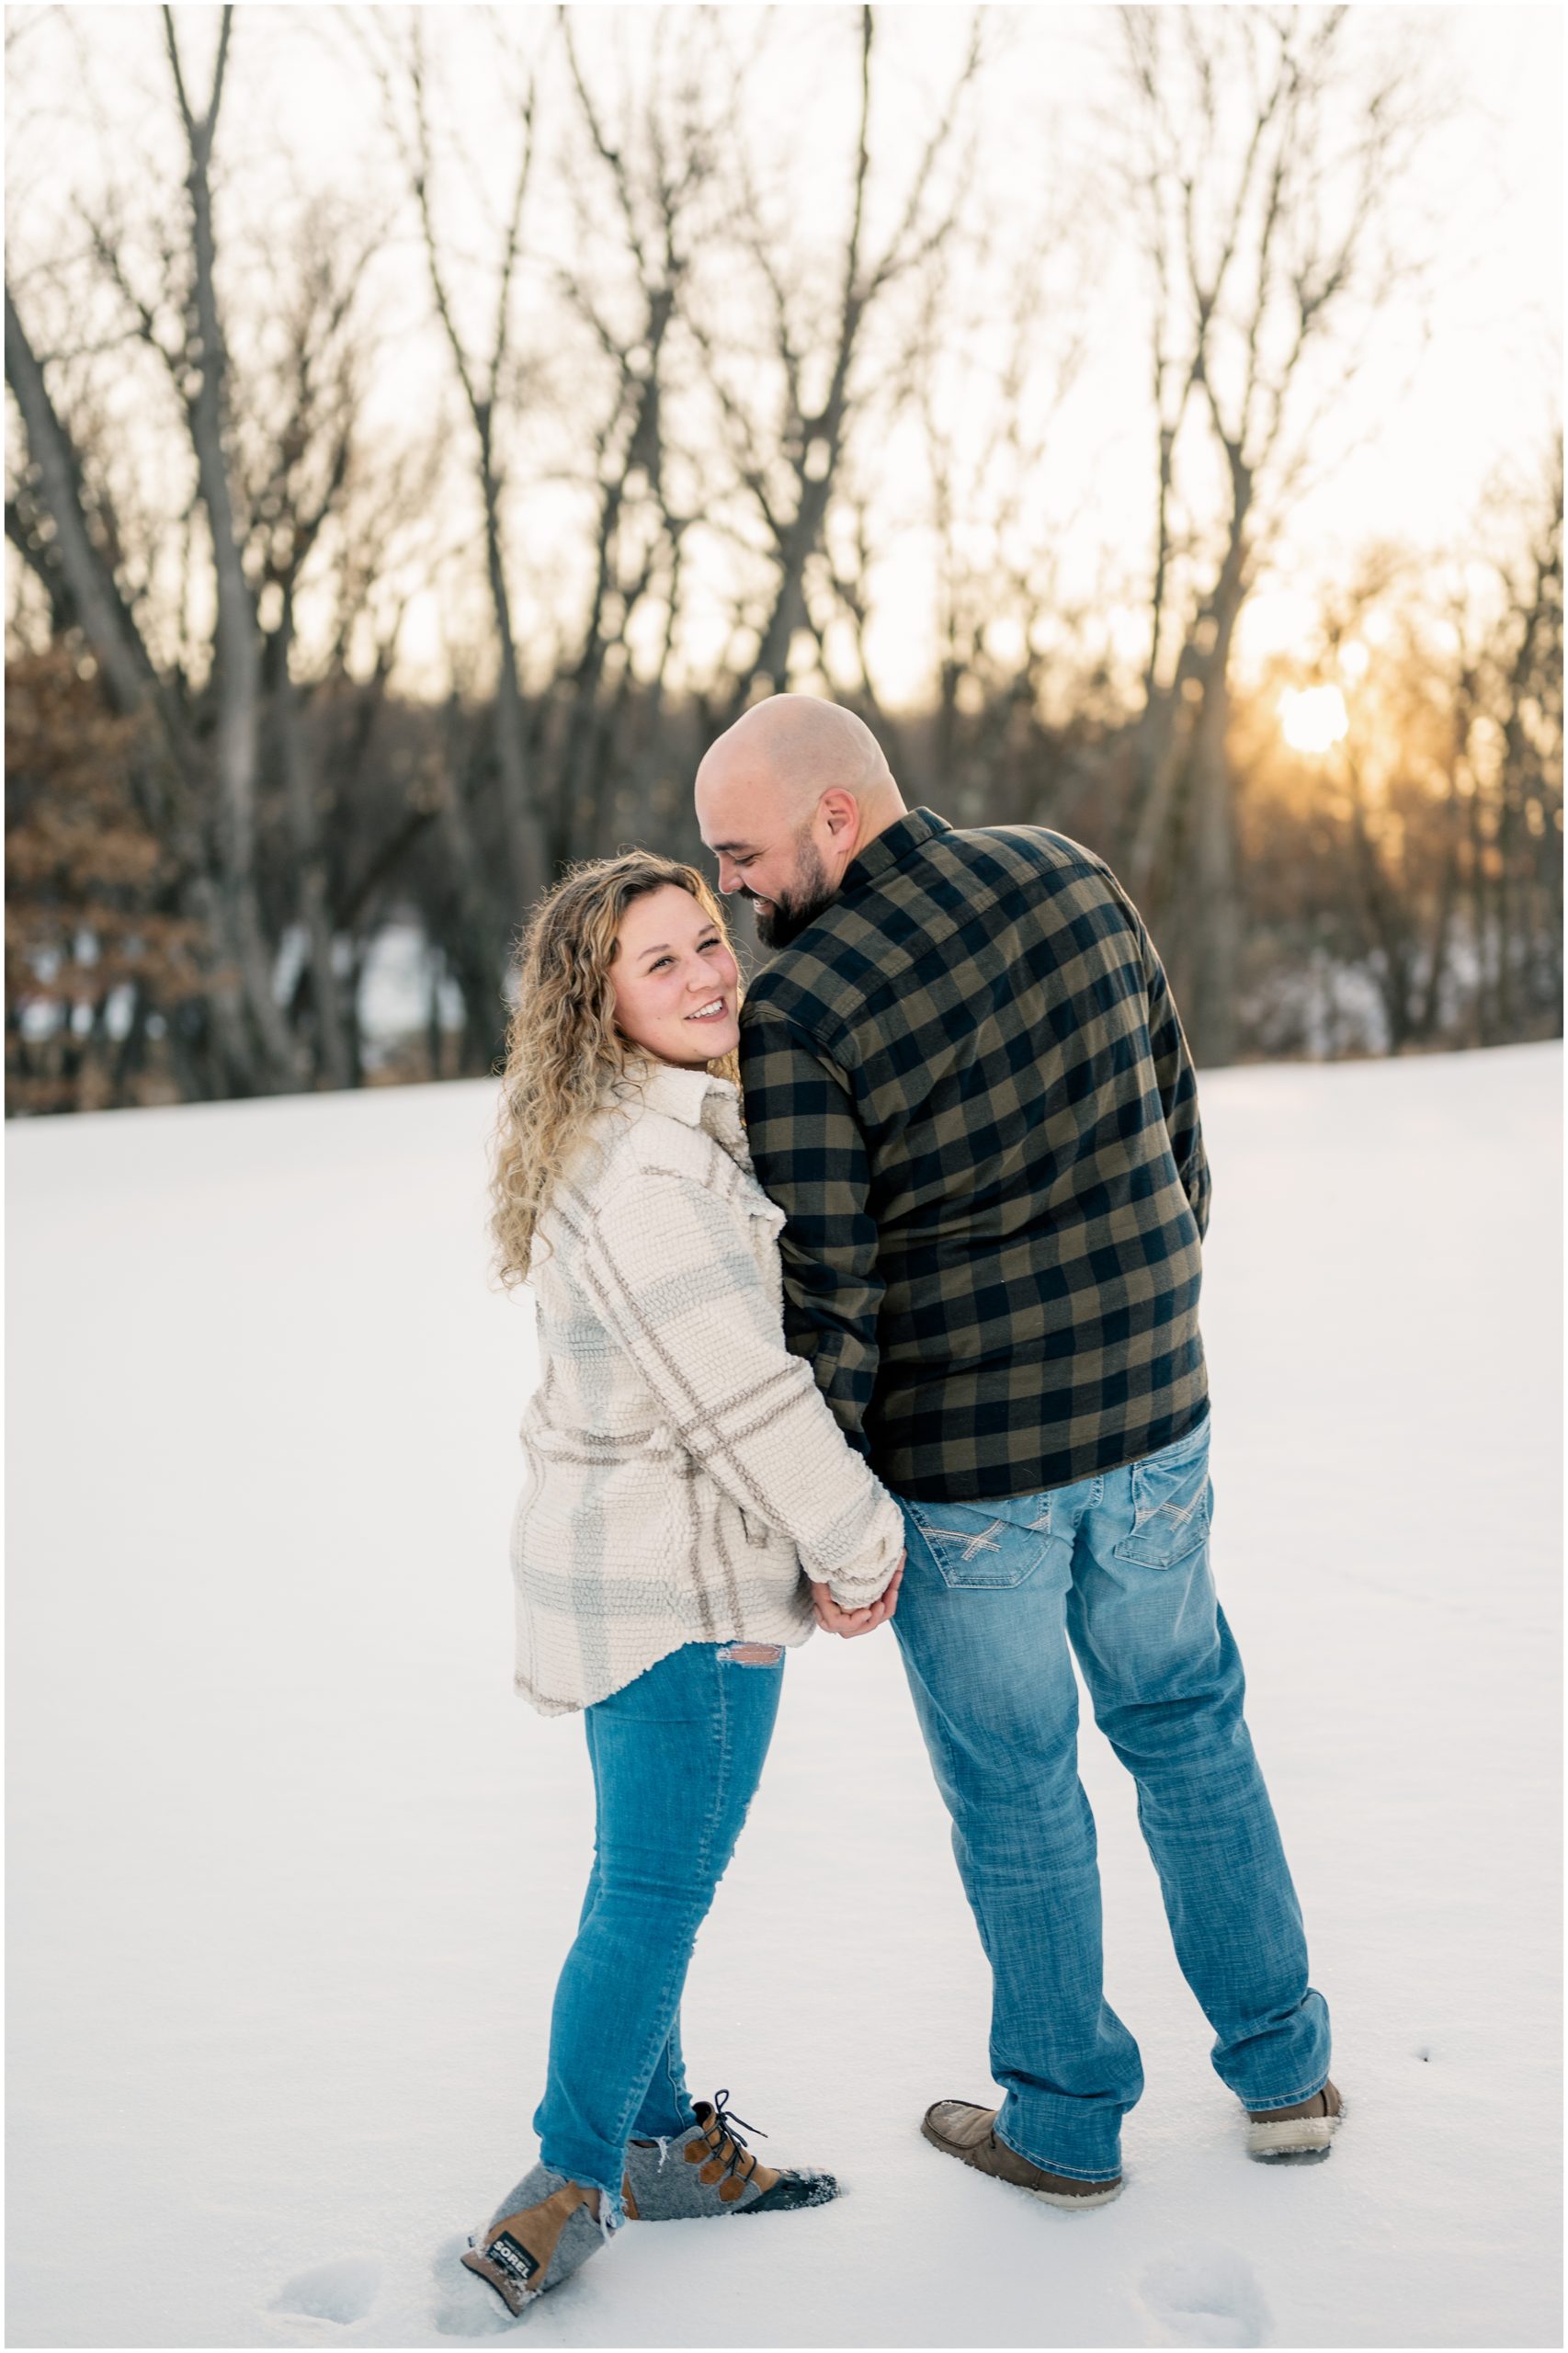 Winter golf course engagement session